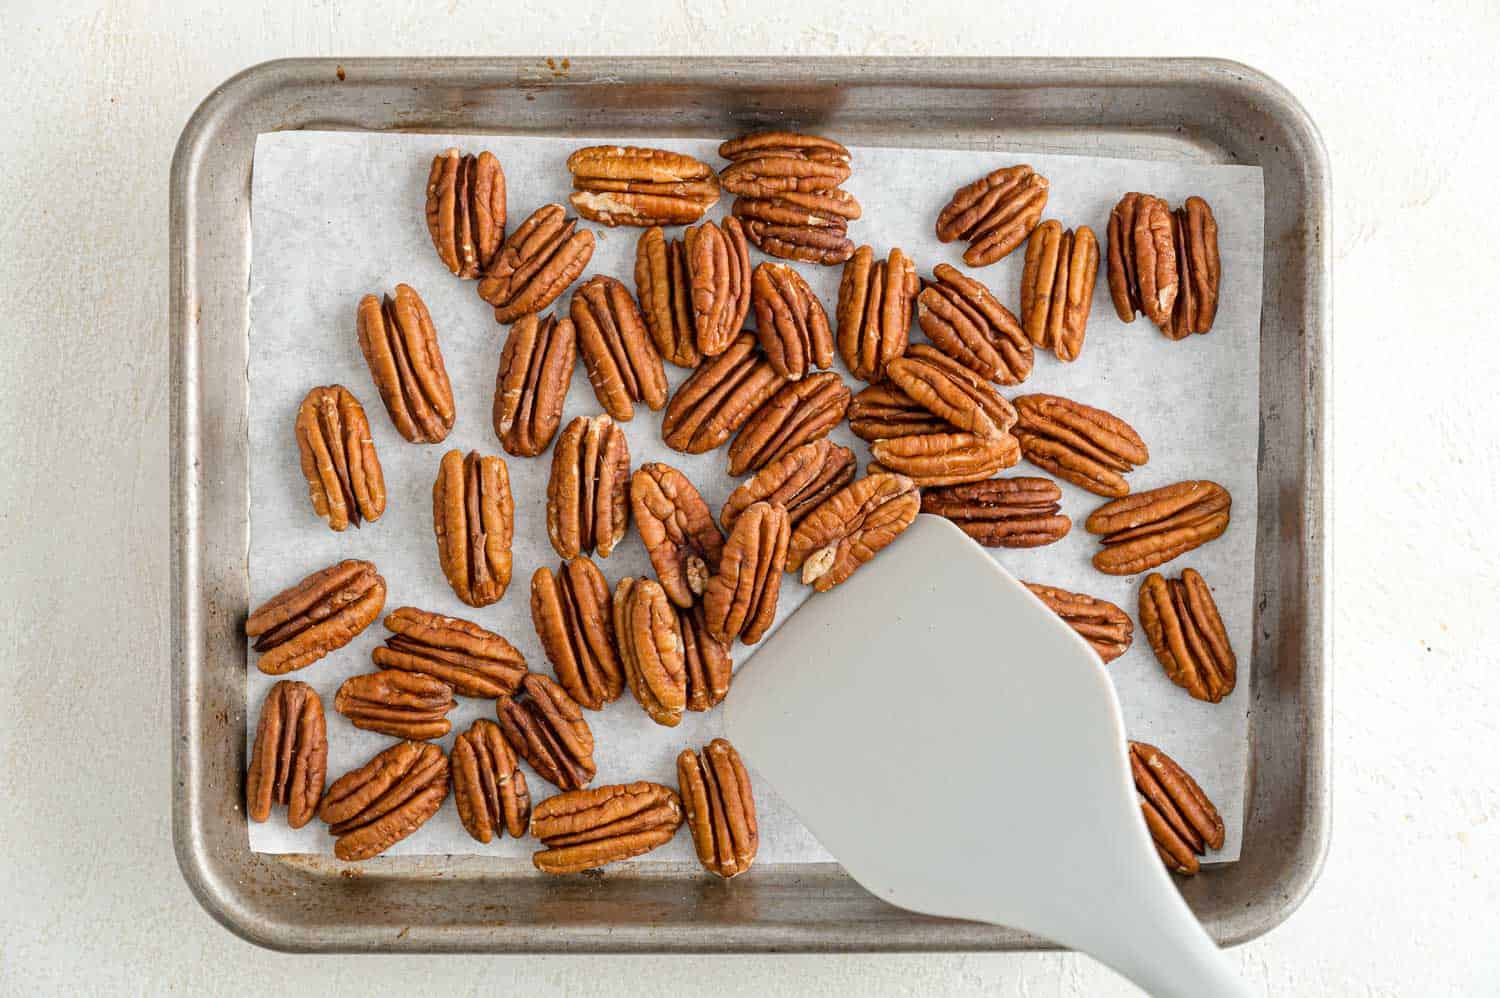 Pecan halves being toasted on a sheet pan.